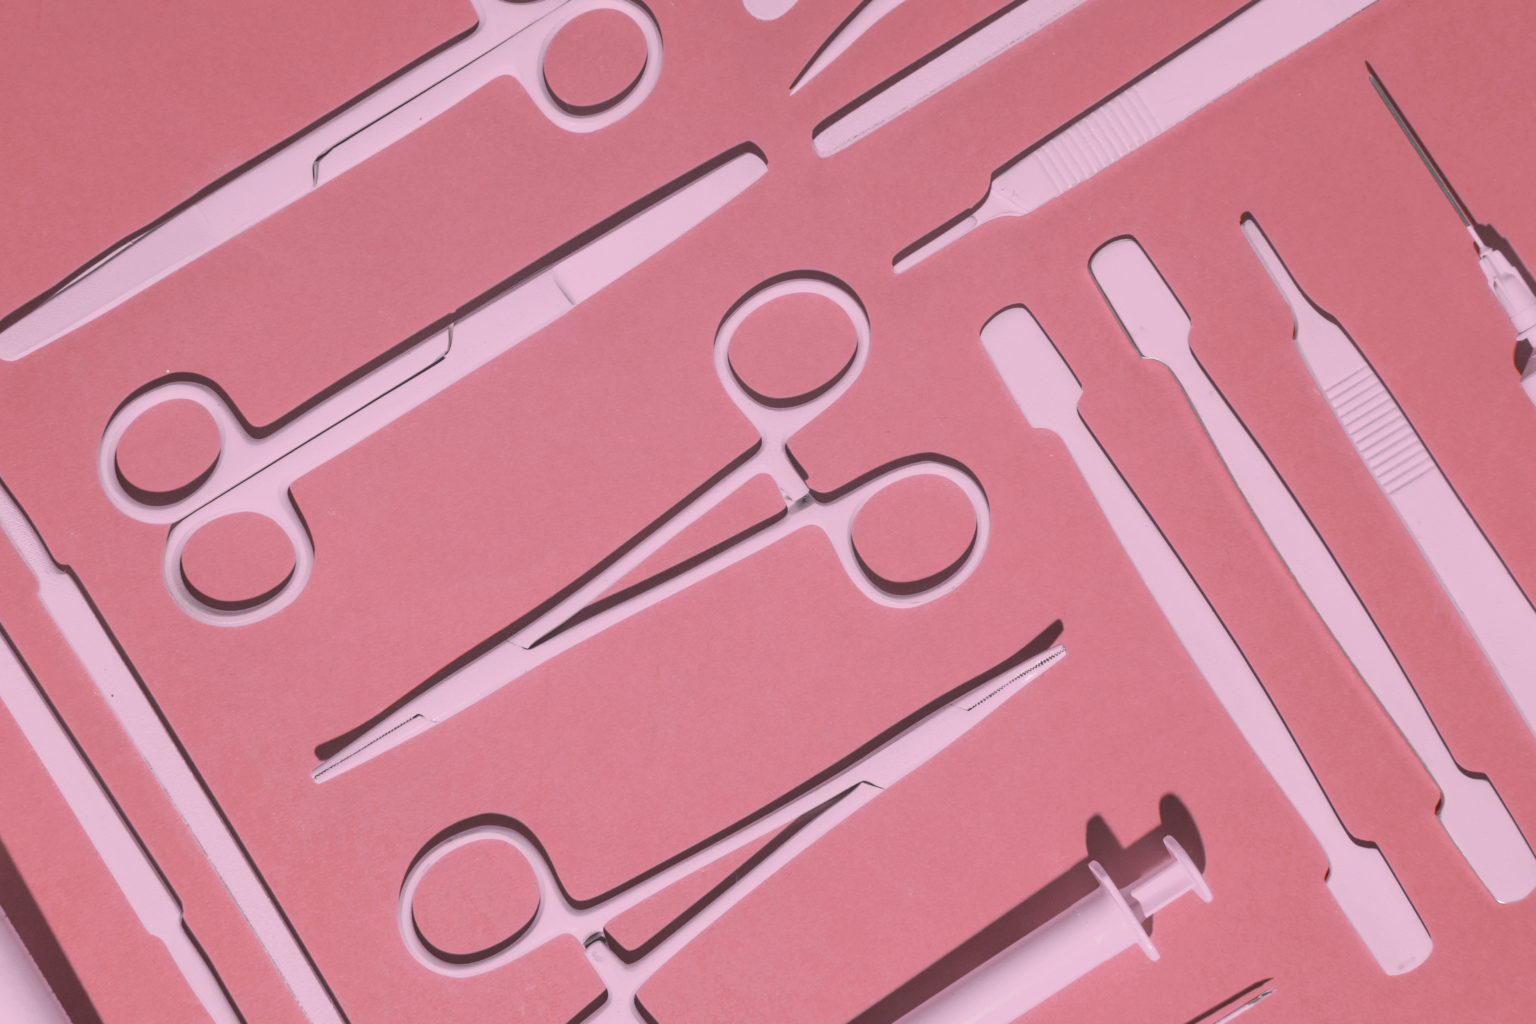 Pink graphic of scissors, needles, and other surgery tools